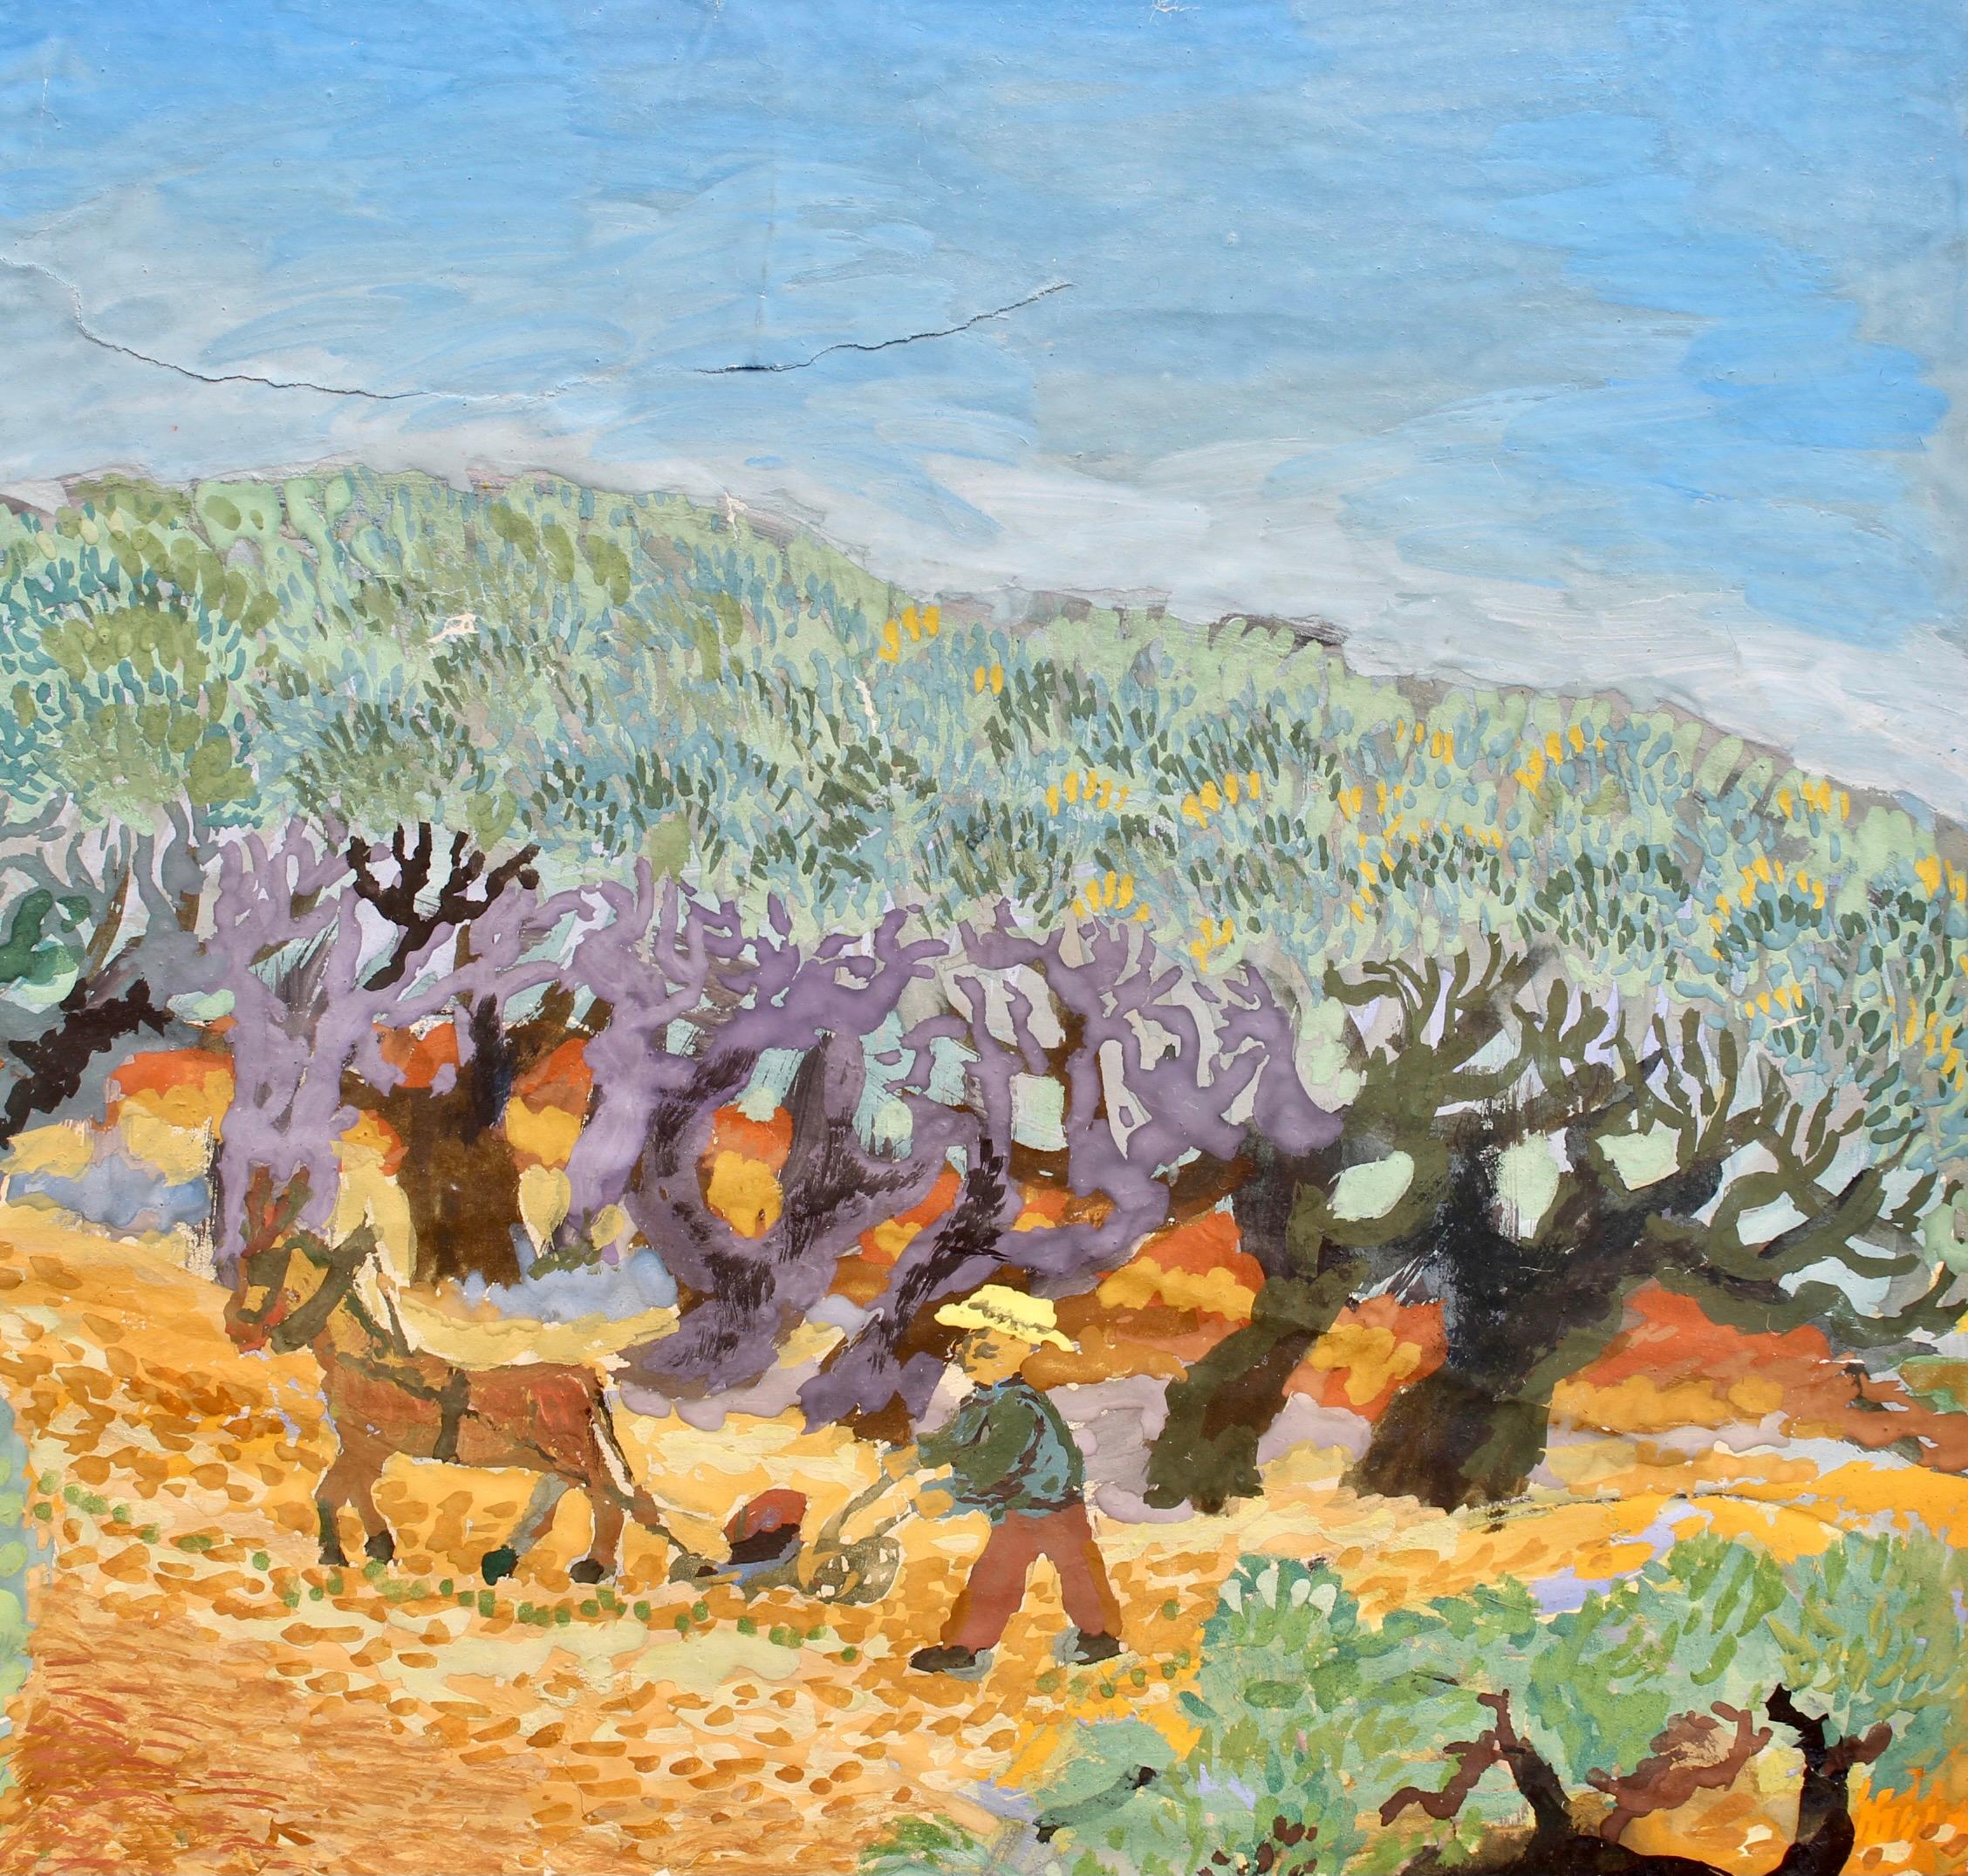 Family Farm in France - Modern Painting by Michel Debiève